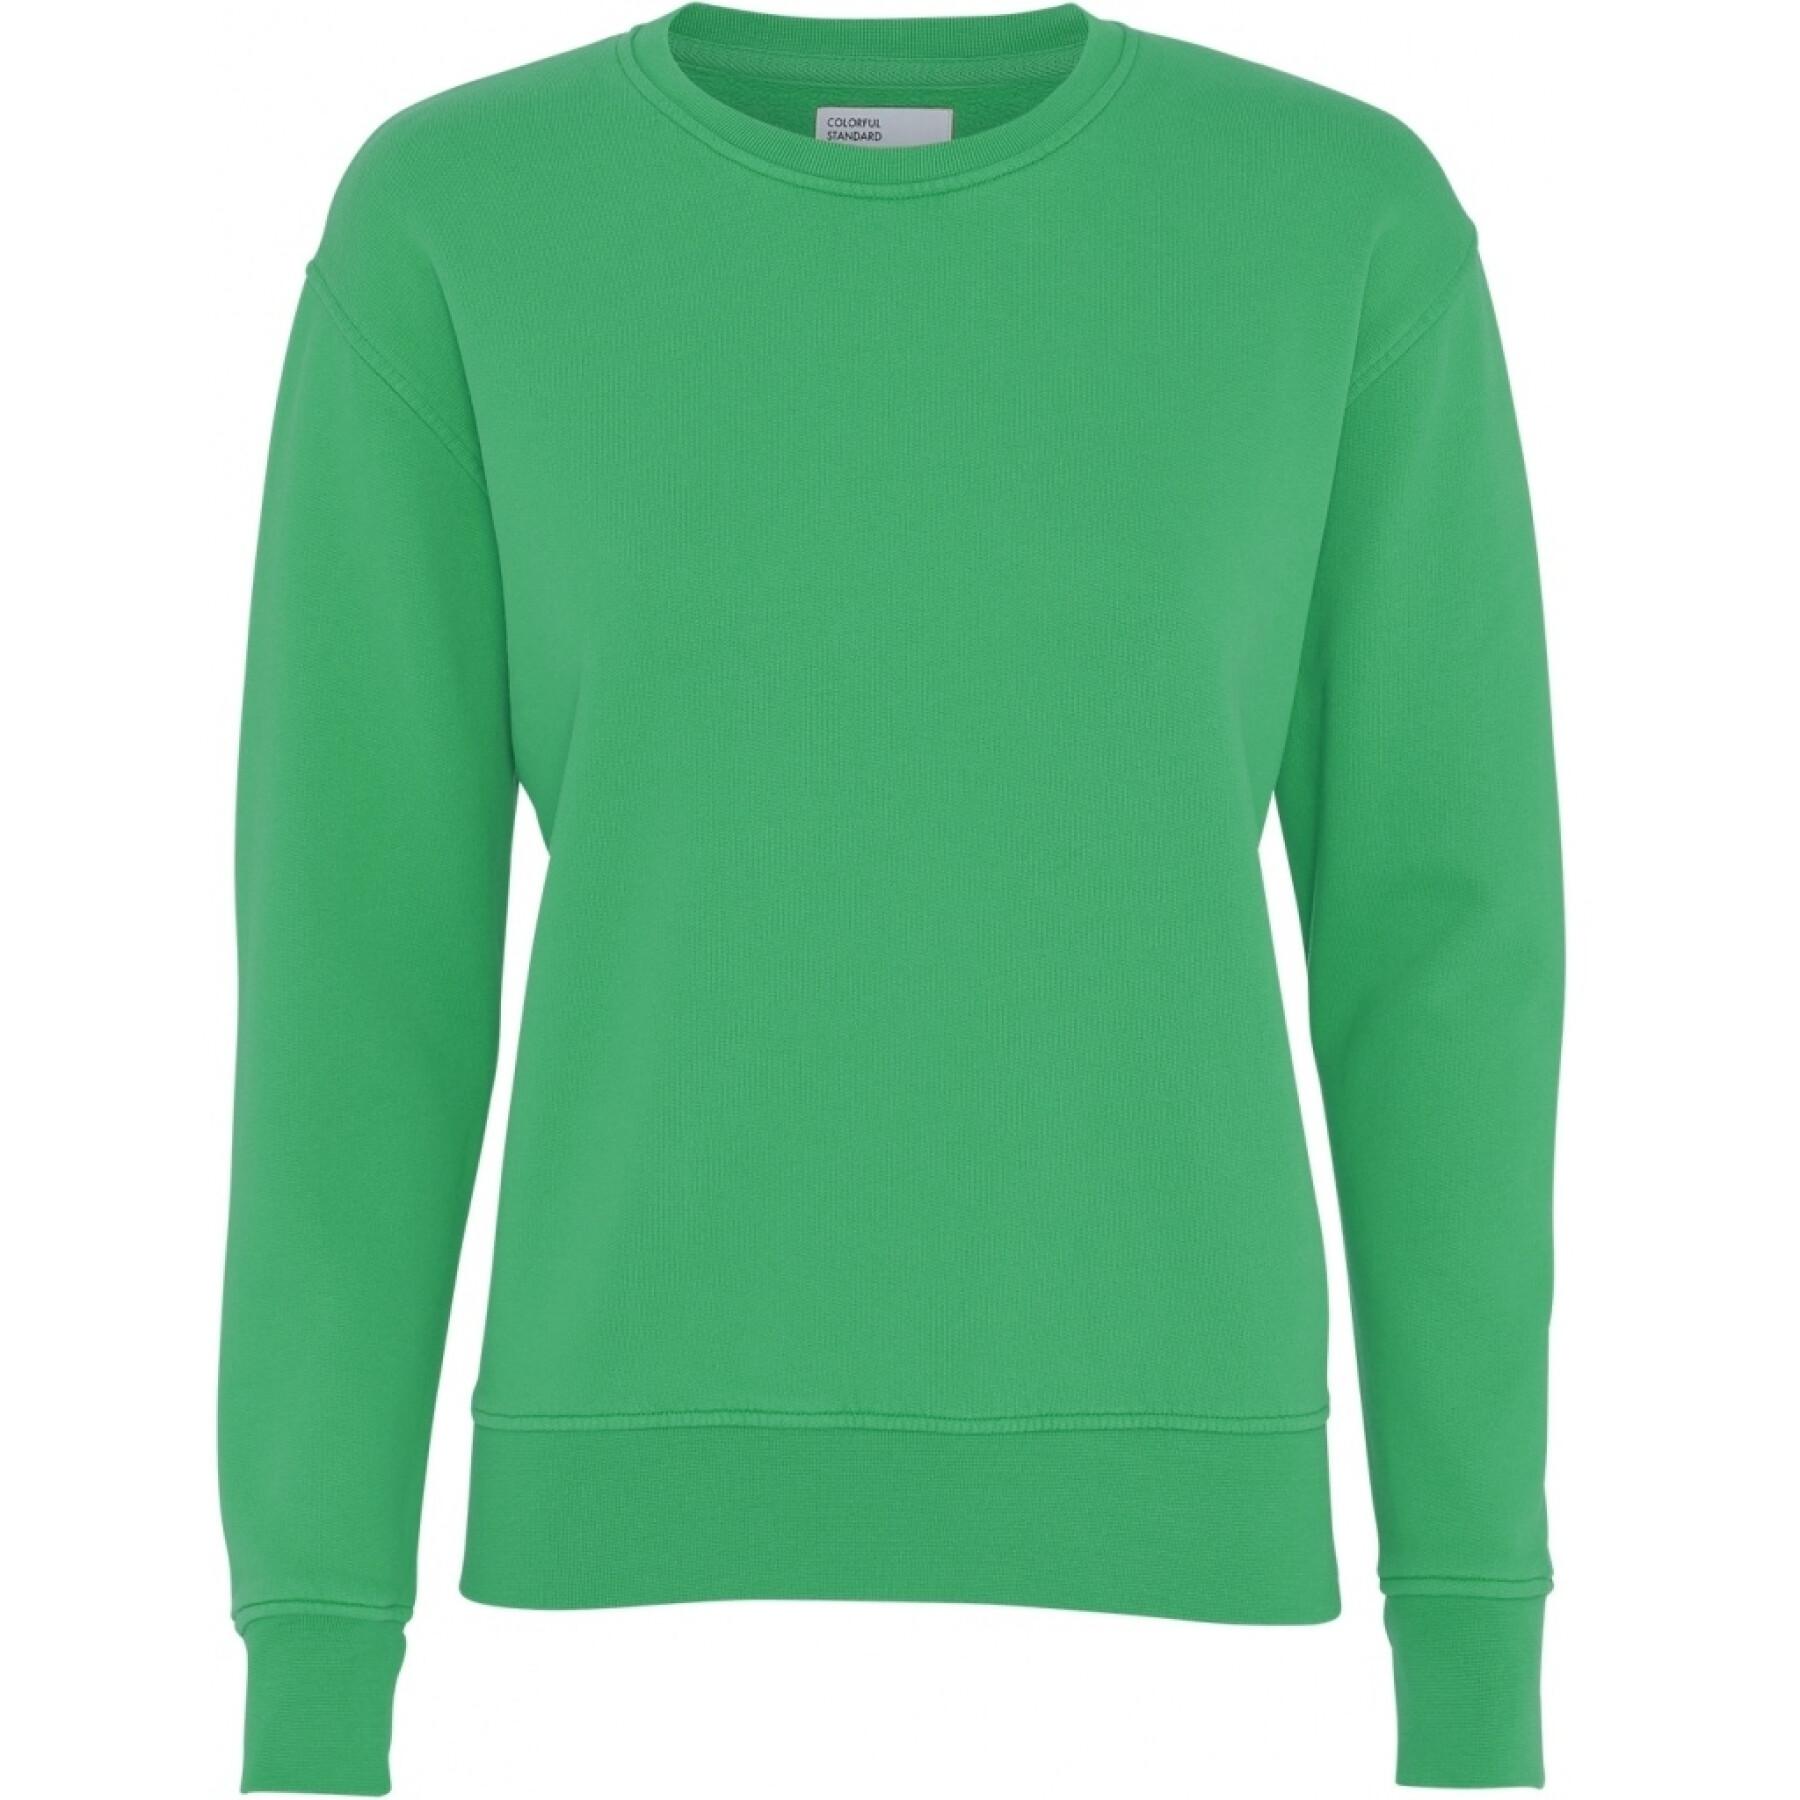 Women's round neck sweater Colorful Standard Classic Organic kelly green